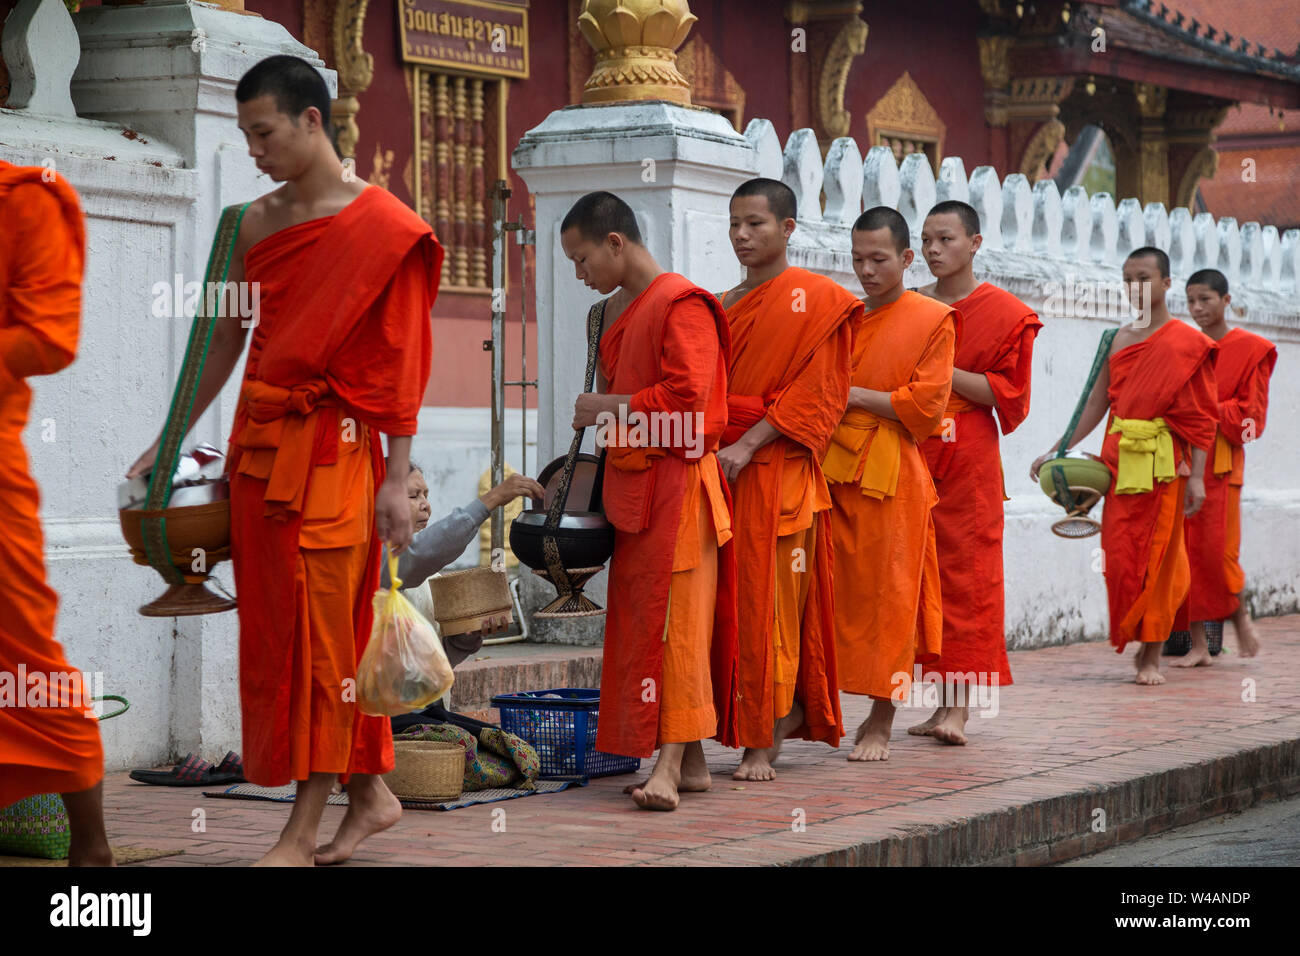 People giving alms to young Buddhist monks on the street early in the morning in front of the Wat Sensoukaram Temple in Luang Prabang, Laos. Tak Bat. Stock Photo